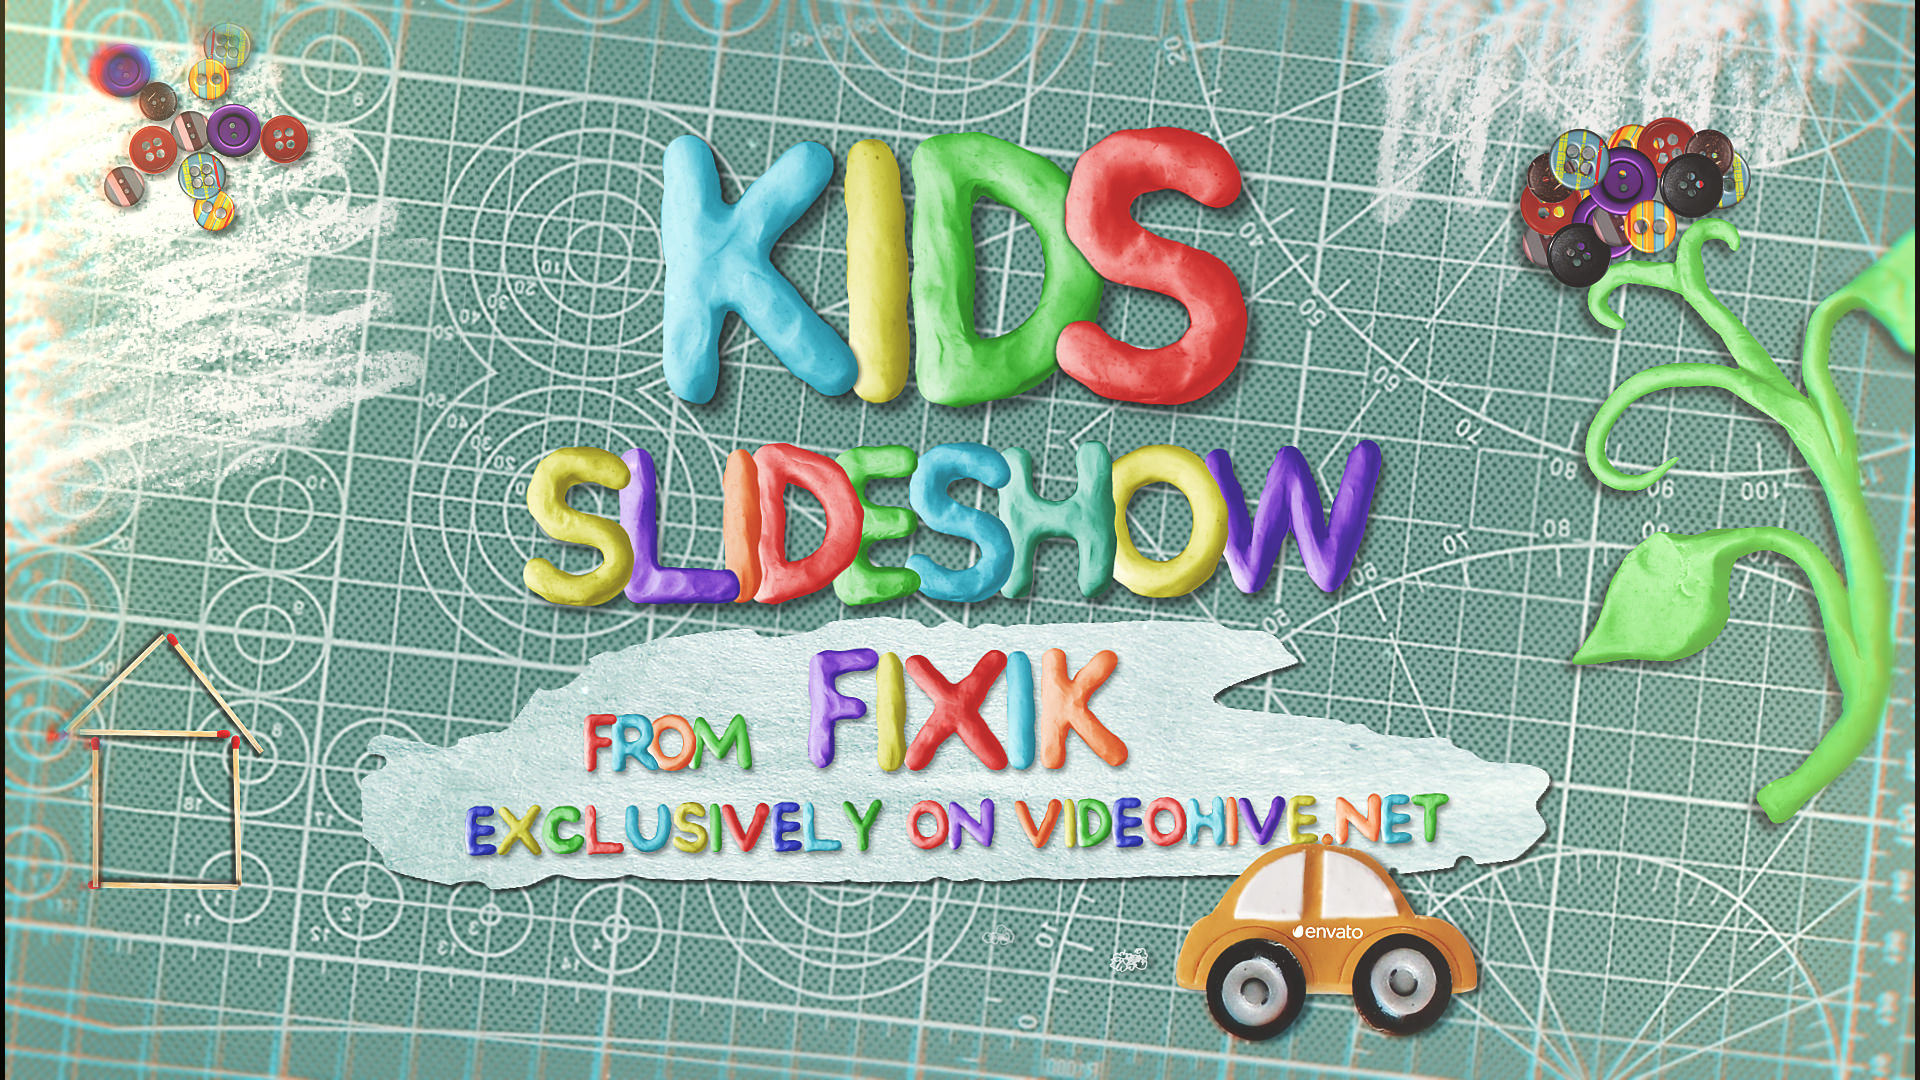  Kids Slideshow | After Effects Template 